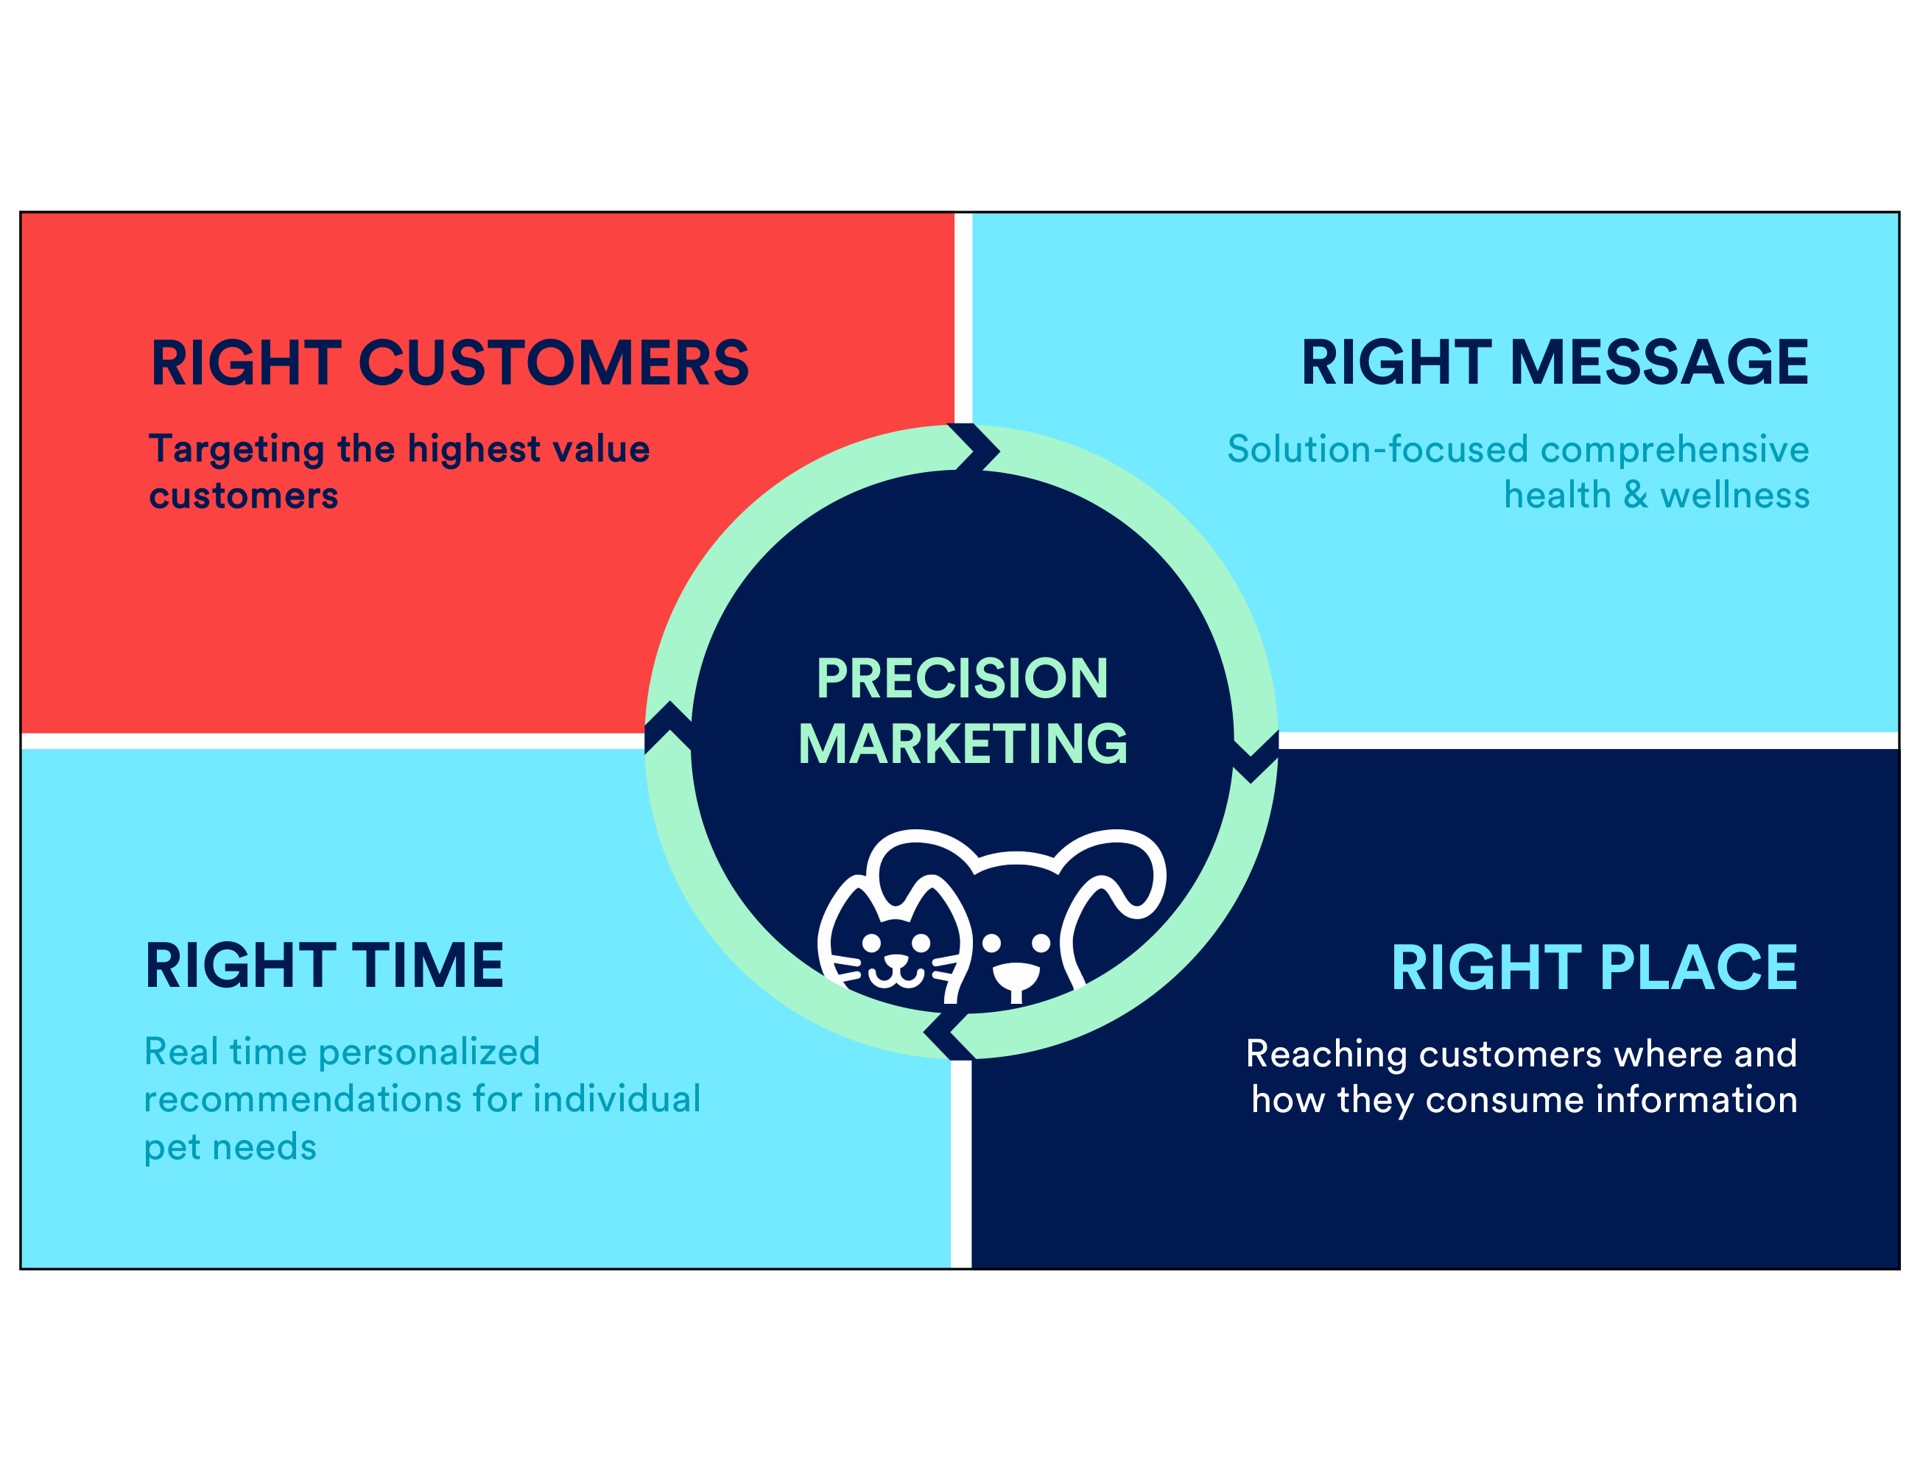 right customers right customers right message precision marketing right time right place solution focused comprehensive health wellness pet needs real personalized recommendations for individual reaching where and how they consume information | Petco